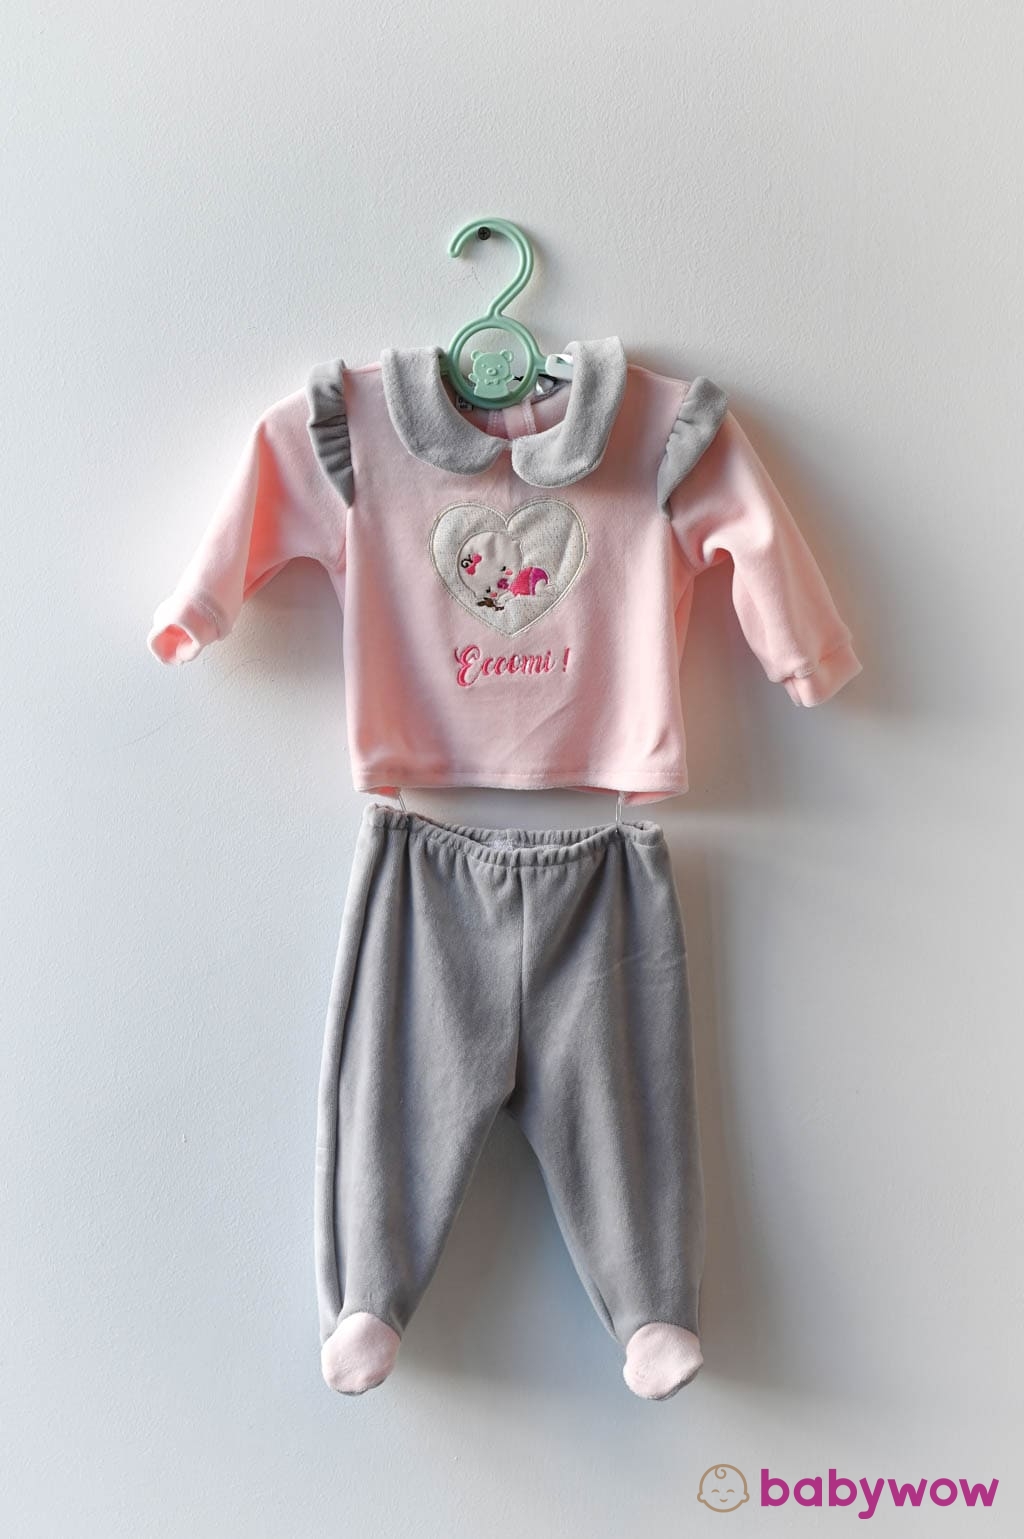 Two-piece chenille onesie "Here I am"